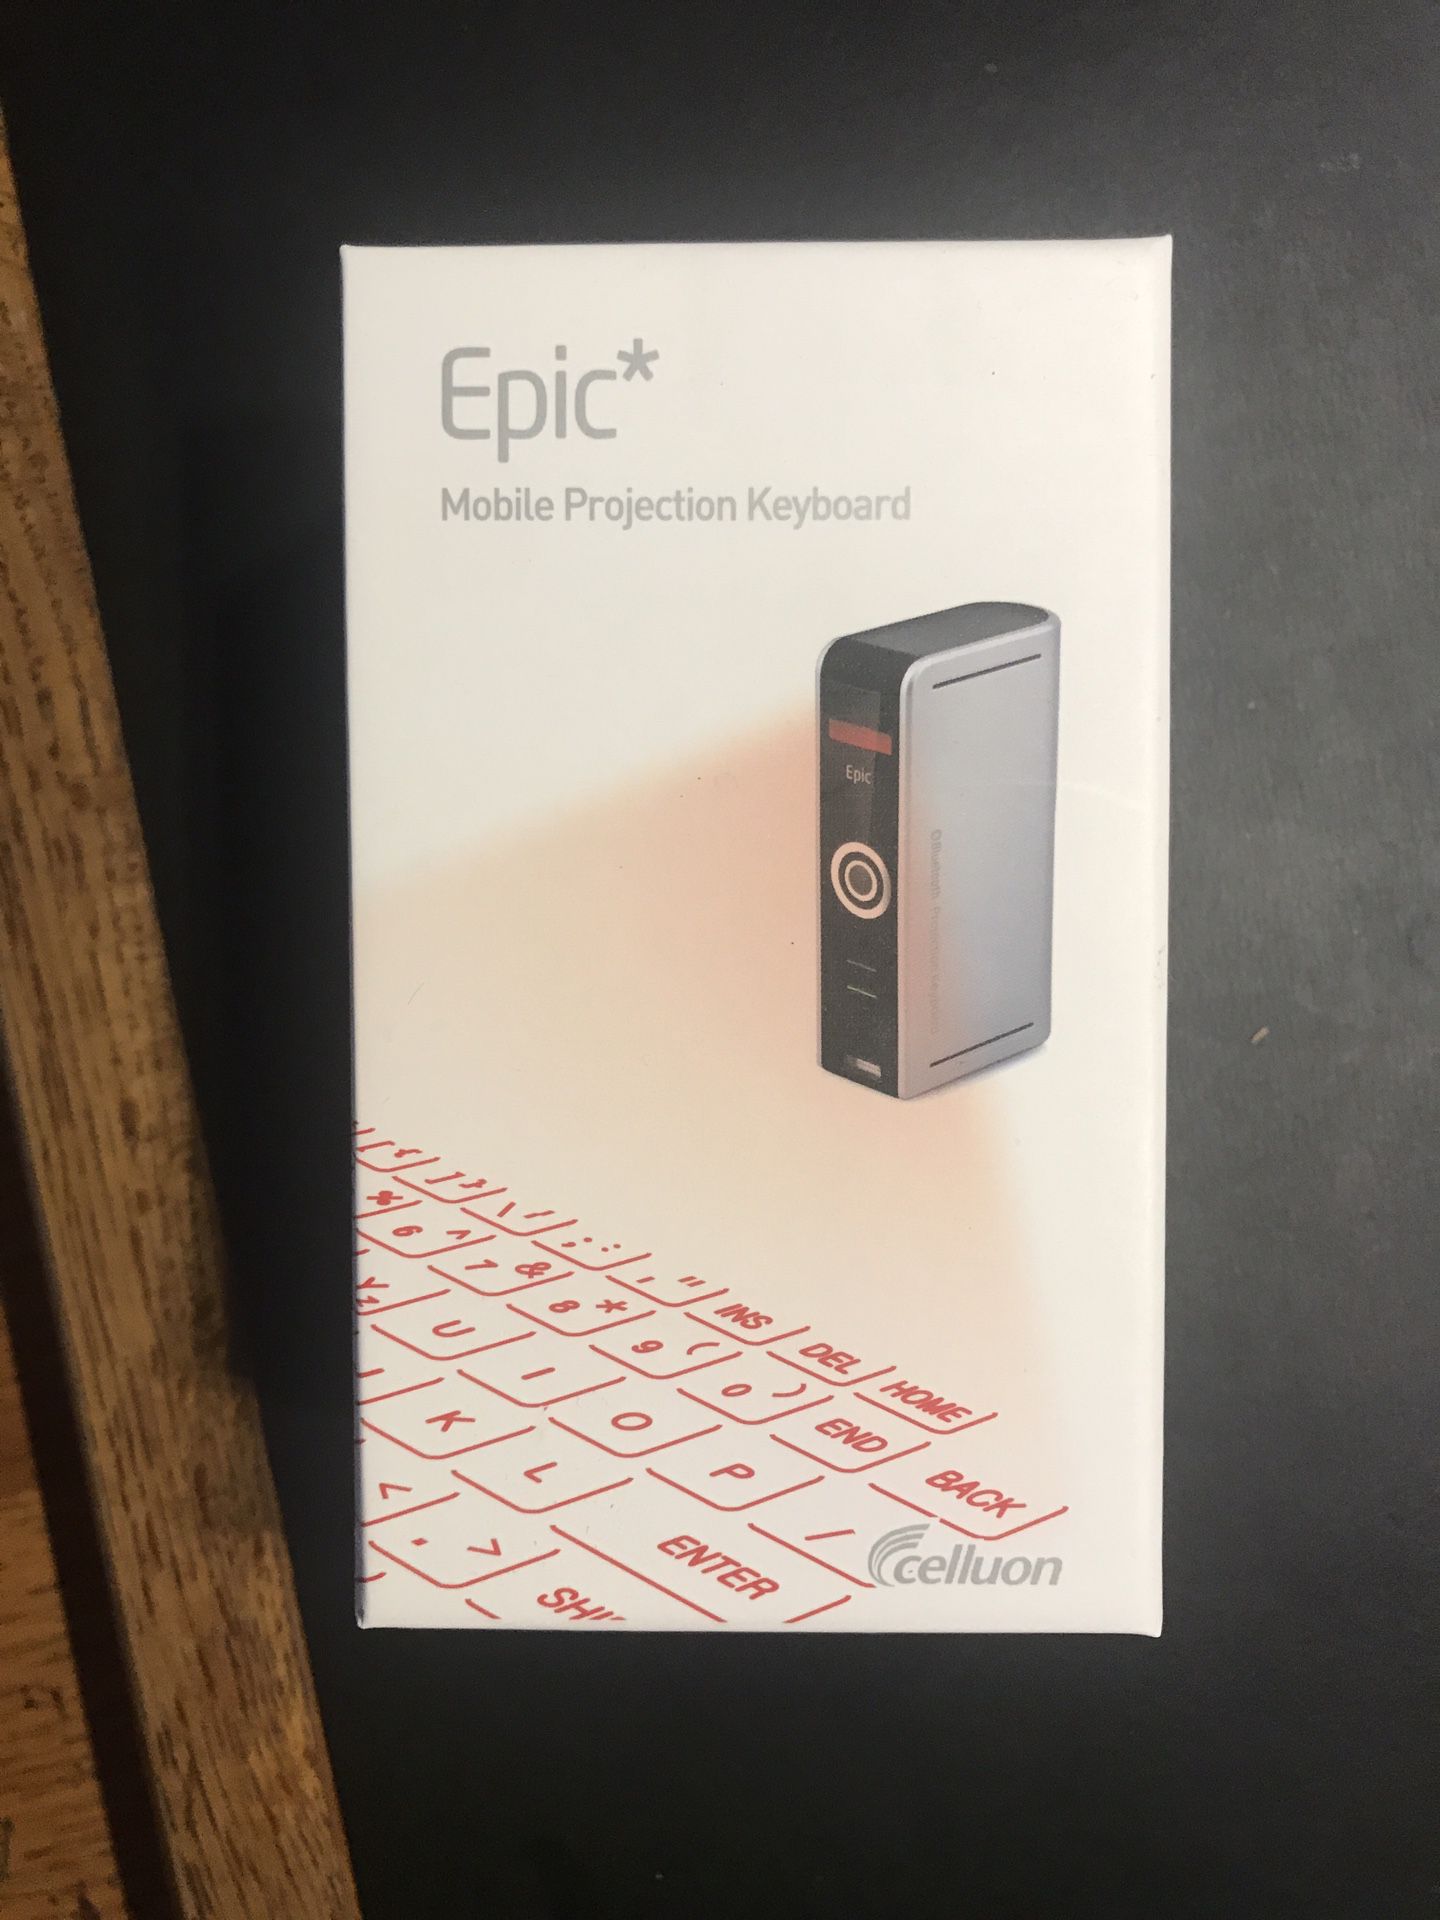 Epic mobile projection keyboard